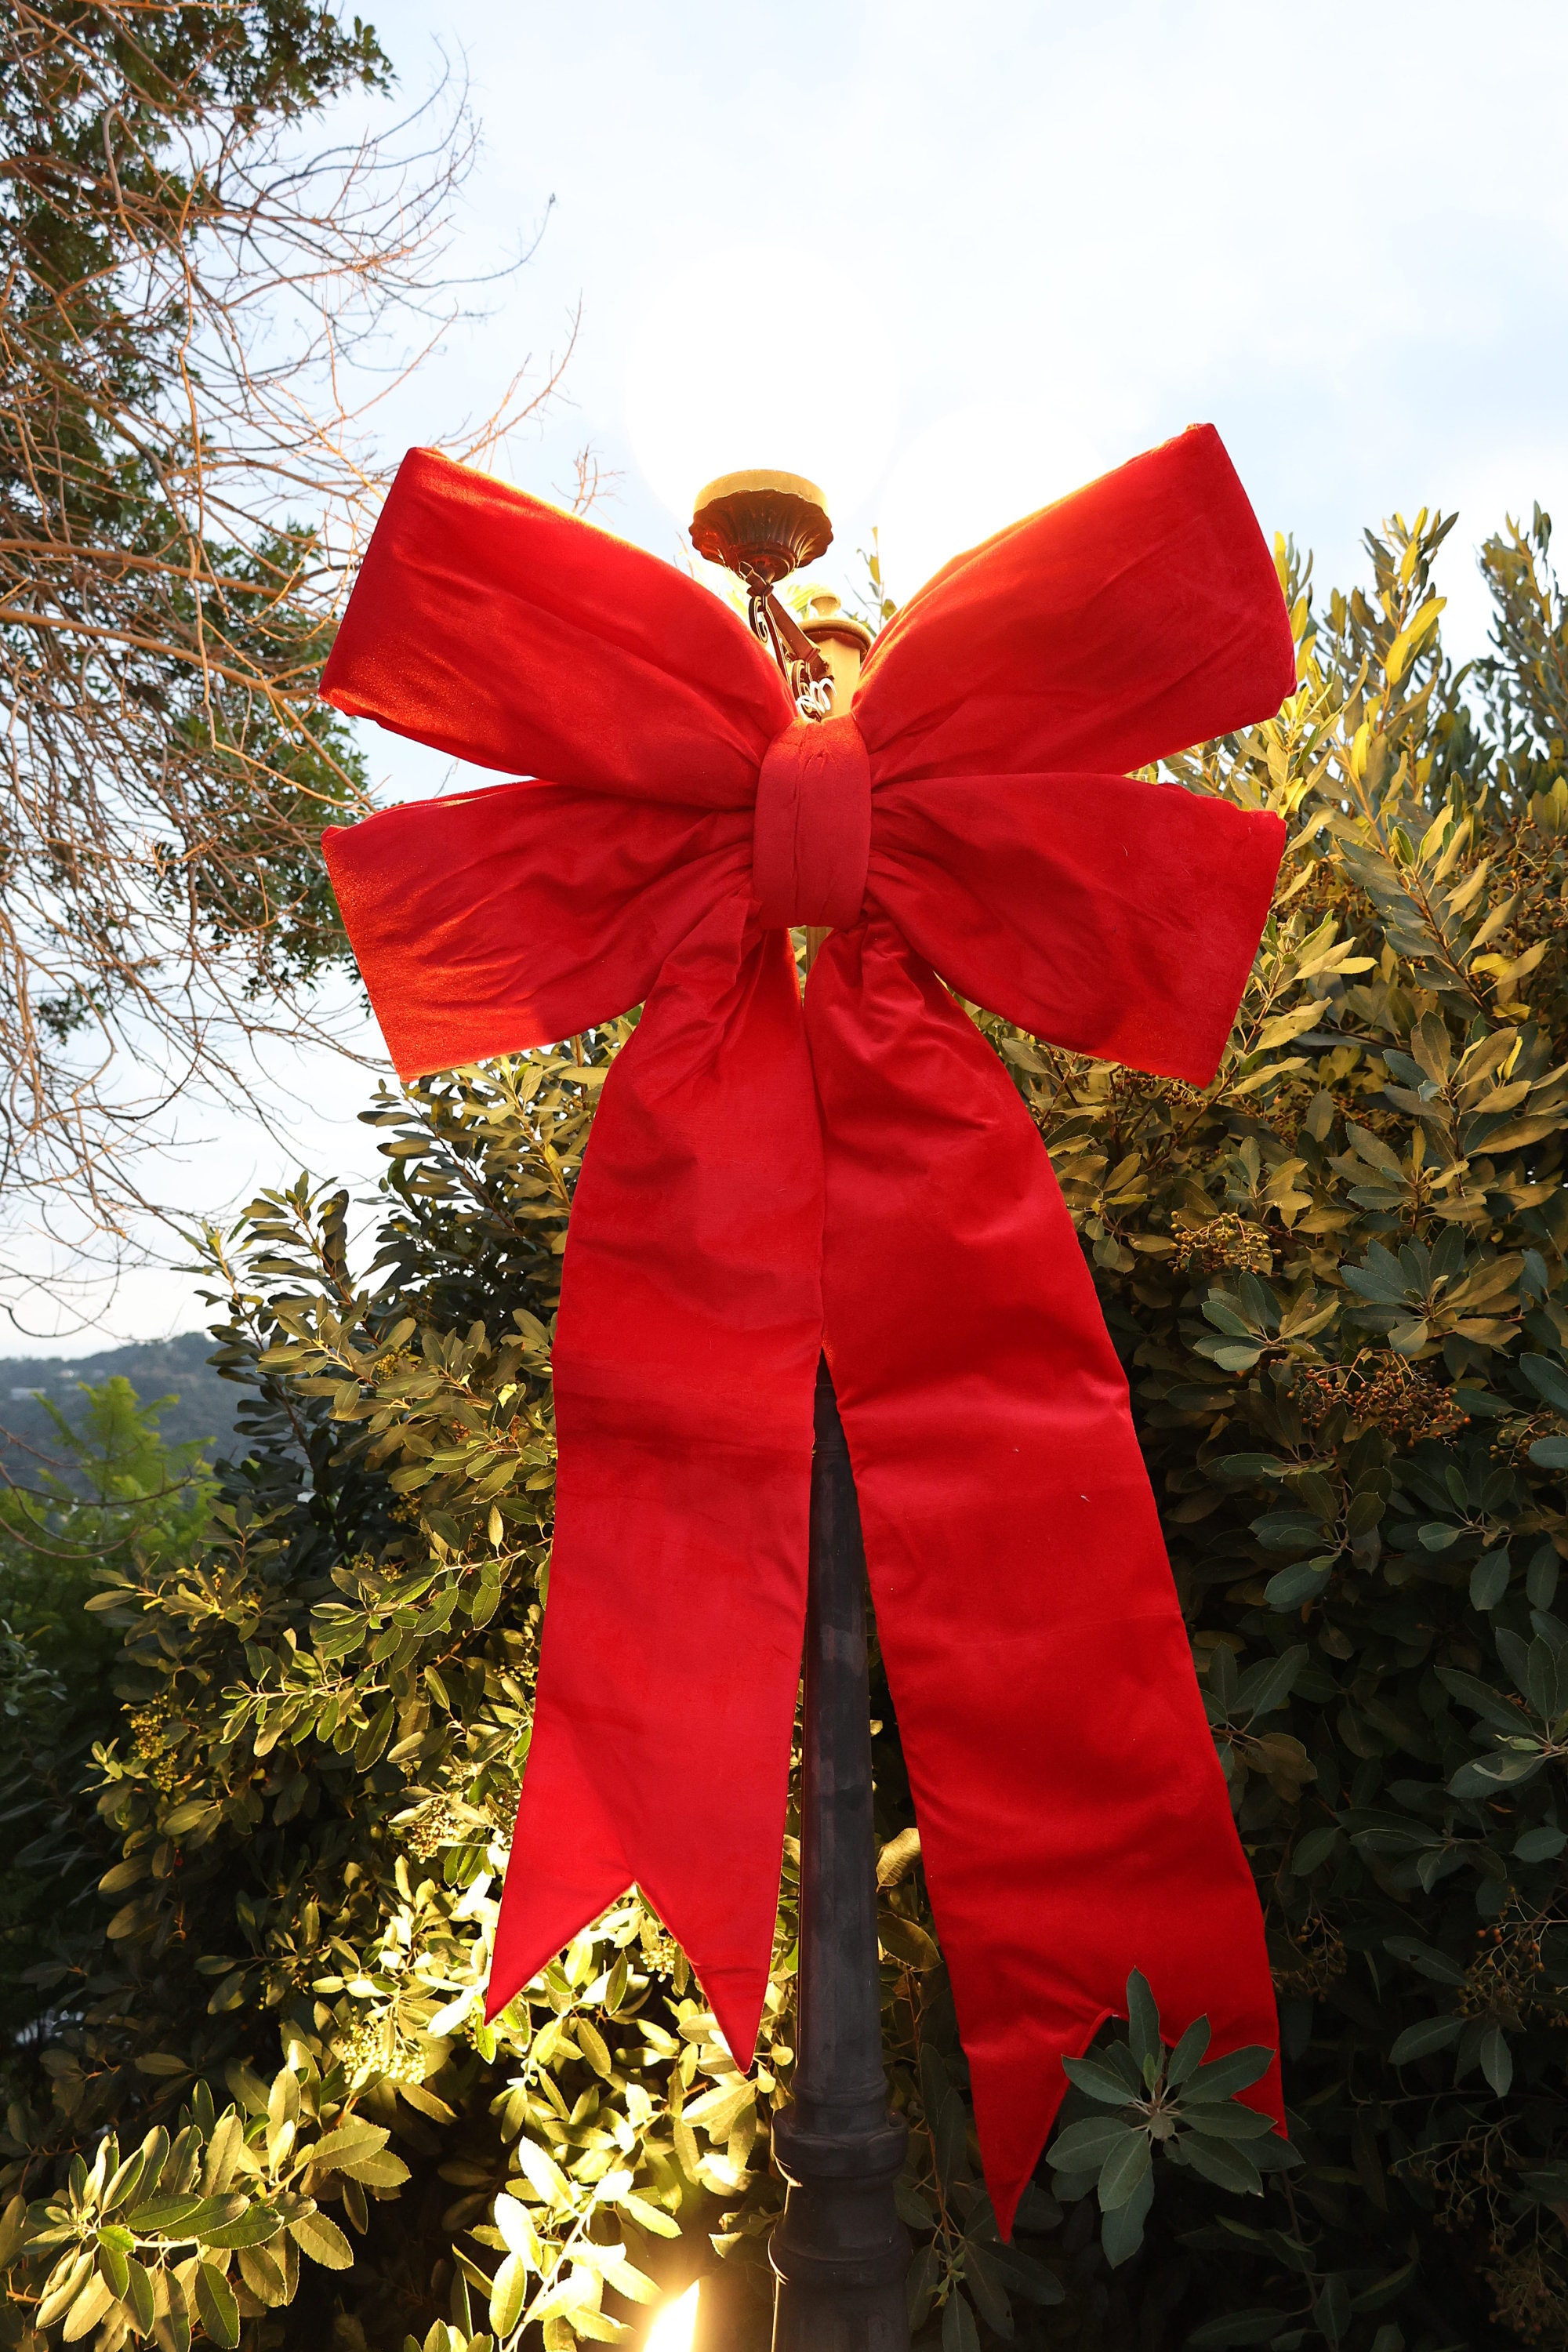 Giant Velvet bow - Ribbon bows of any size. For gifts, cars and buildings